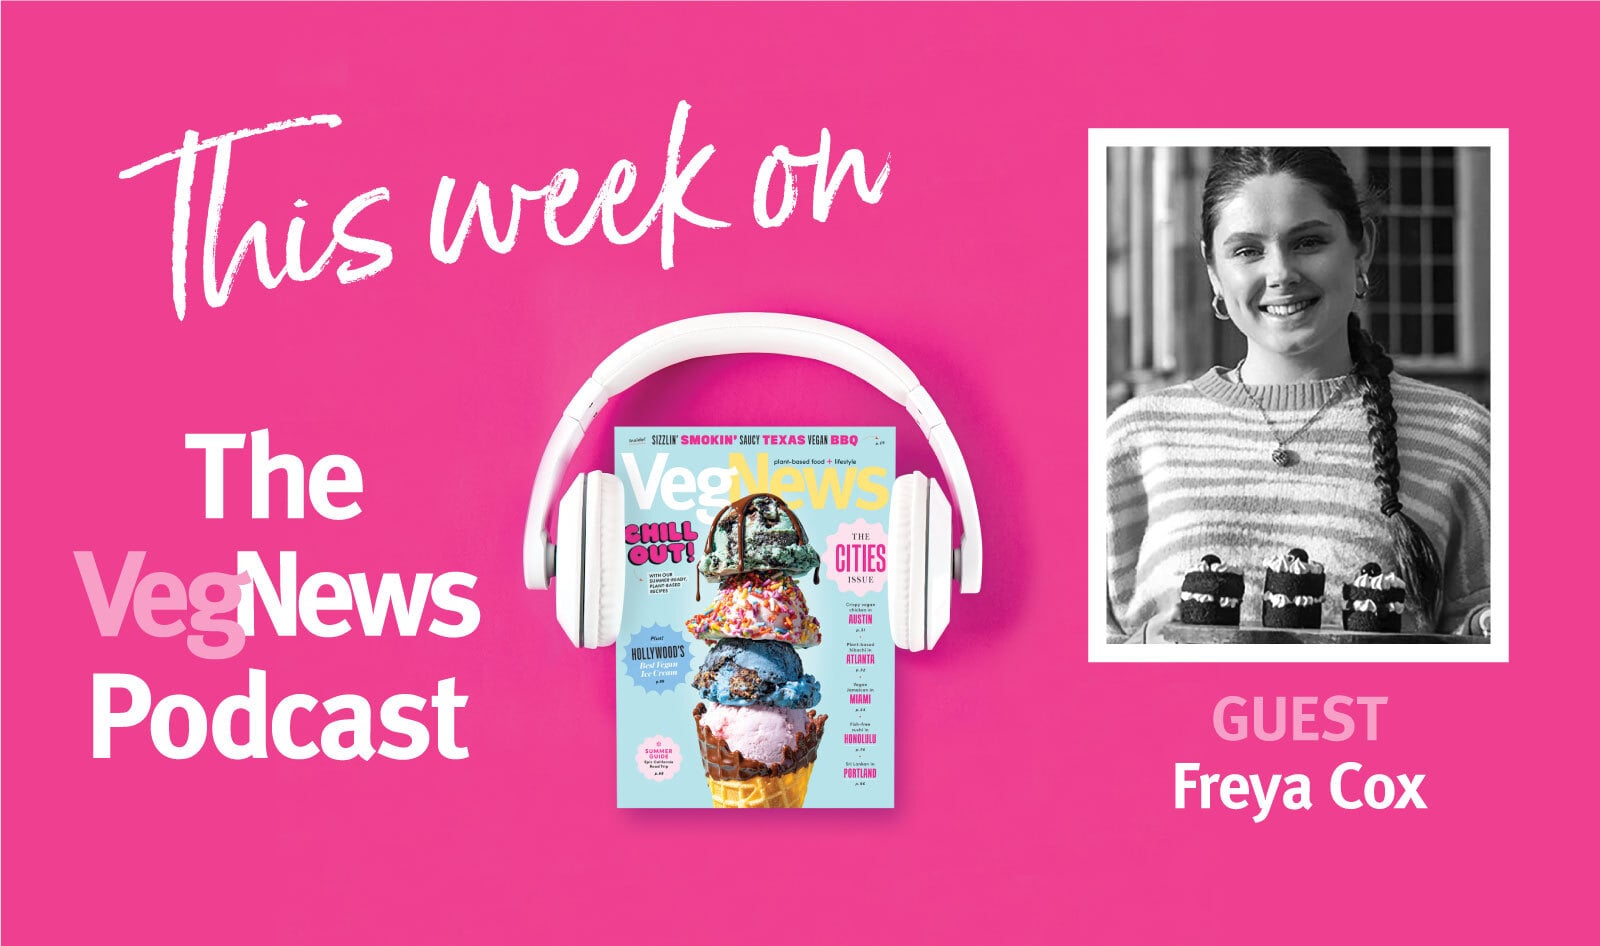 The VegNews Podcast Show Notes: Episode 2